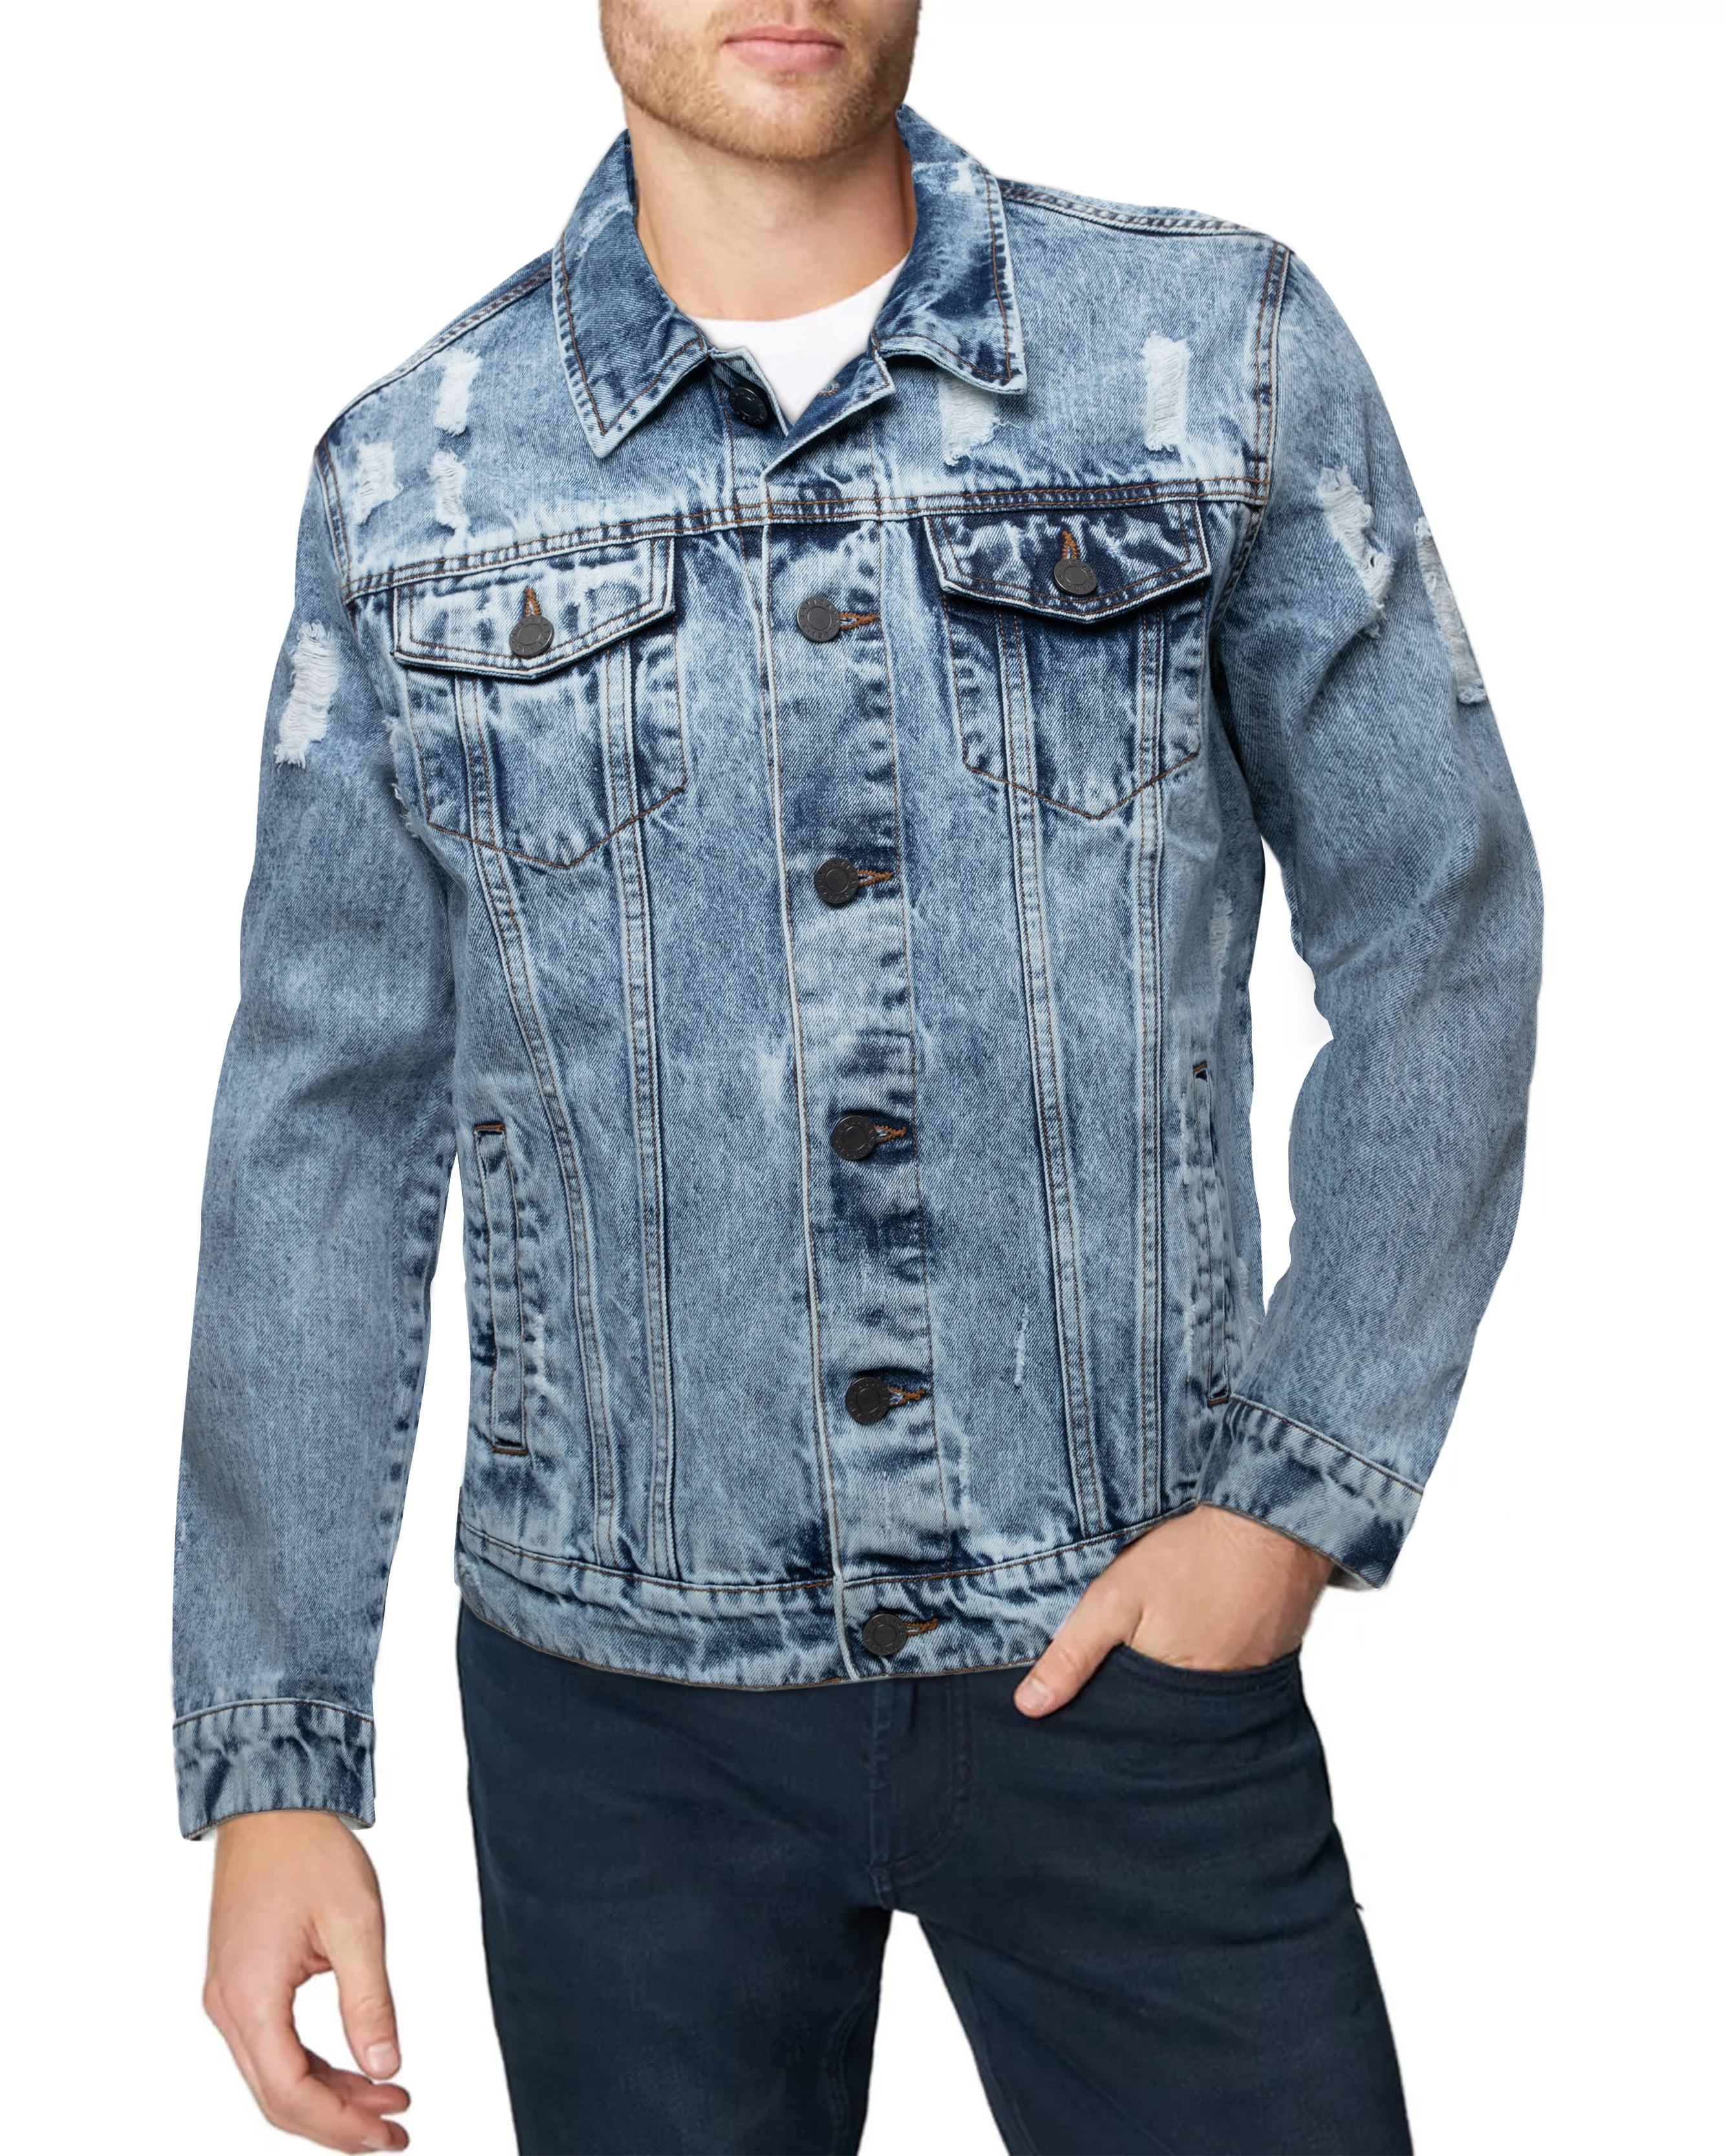 X RAY Mens Denim Jacket Washed Casual Trucker Jean Jacket for Men 